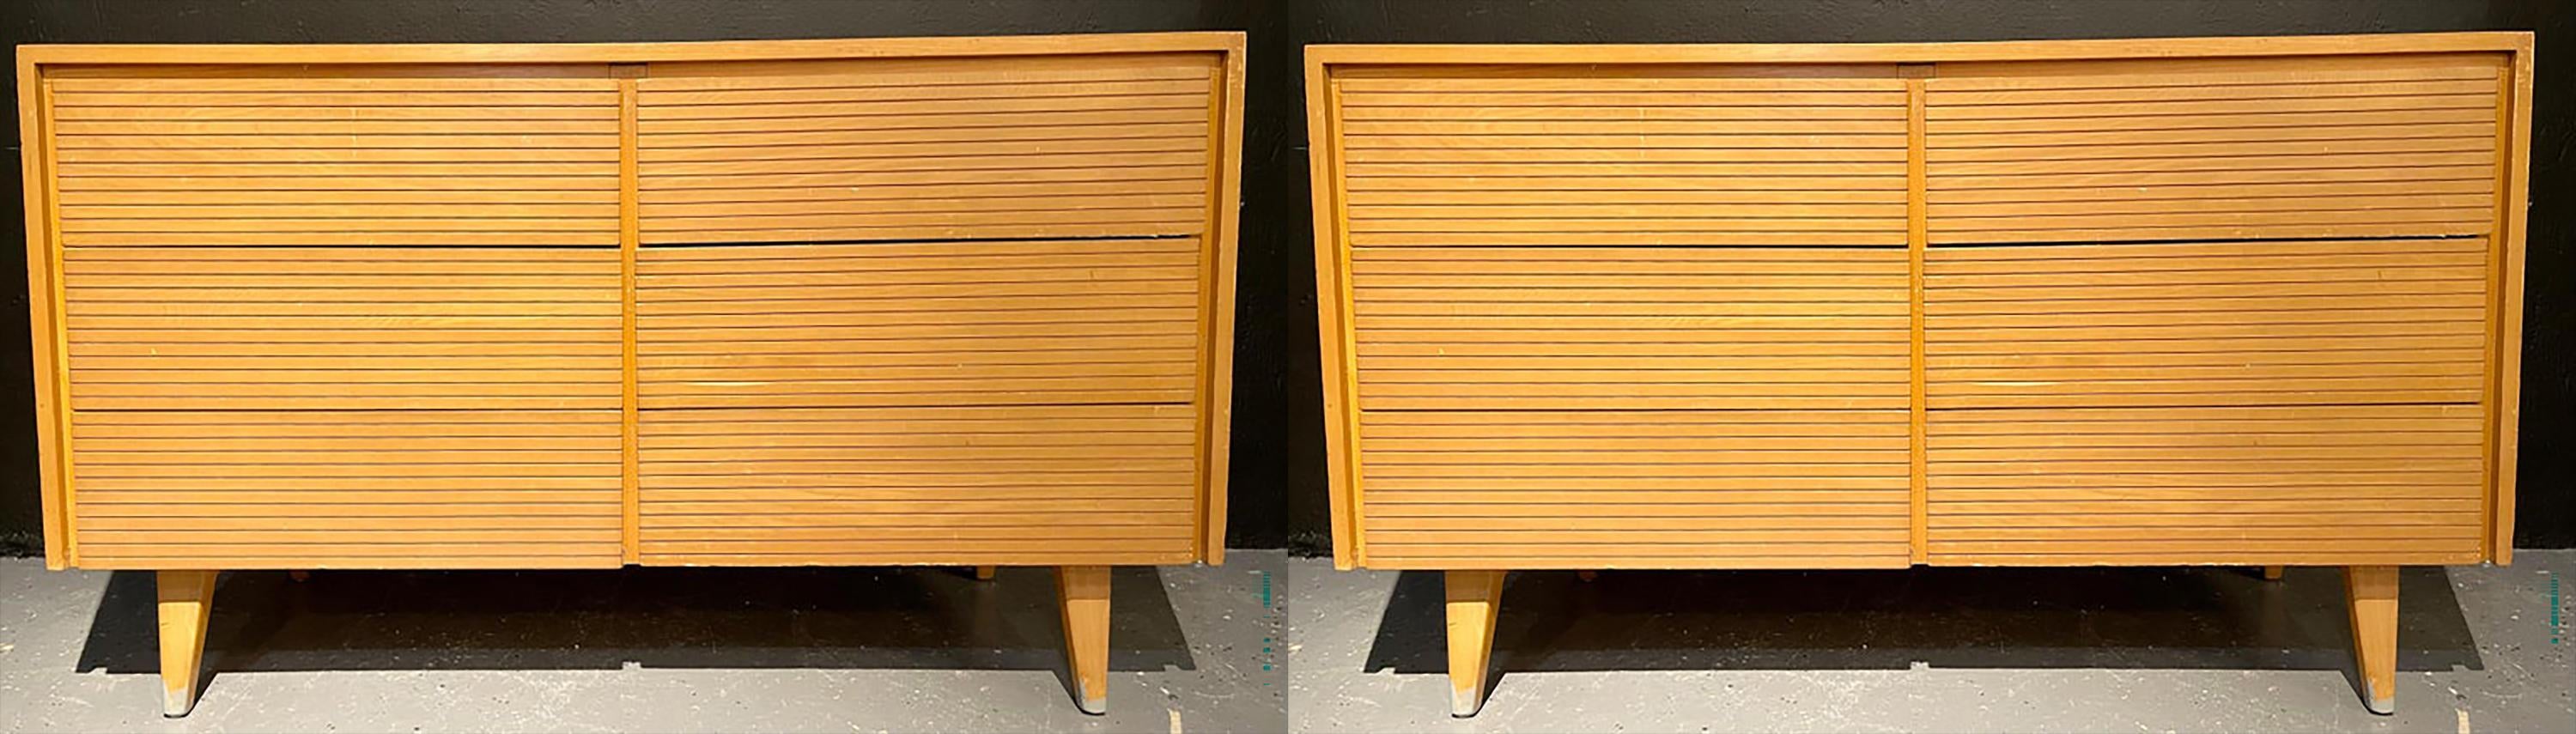 Pair of six-drawer Mid-Century Modern chests, dressers or nightstand commodes. Each in a fine teak finish having three by three drawers on tapering rounded legs. The case in need of some refinishing. Priced accordingly. We can have these fully